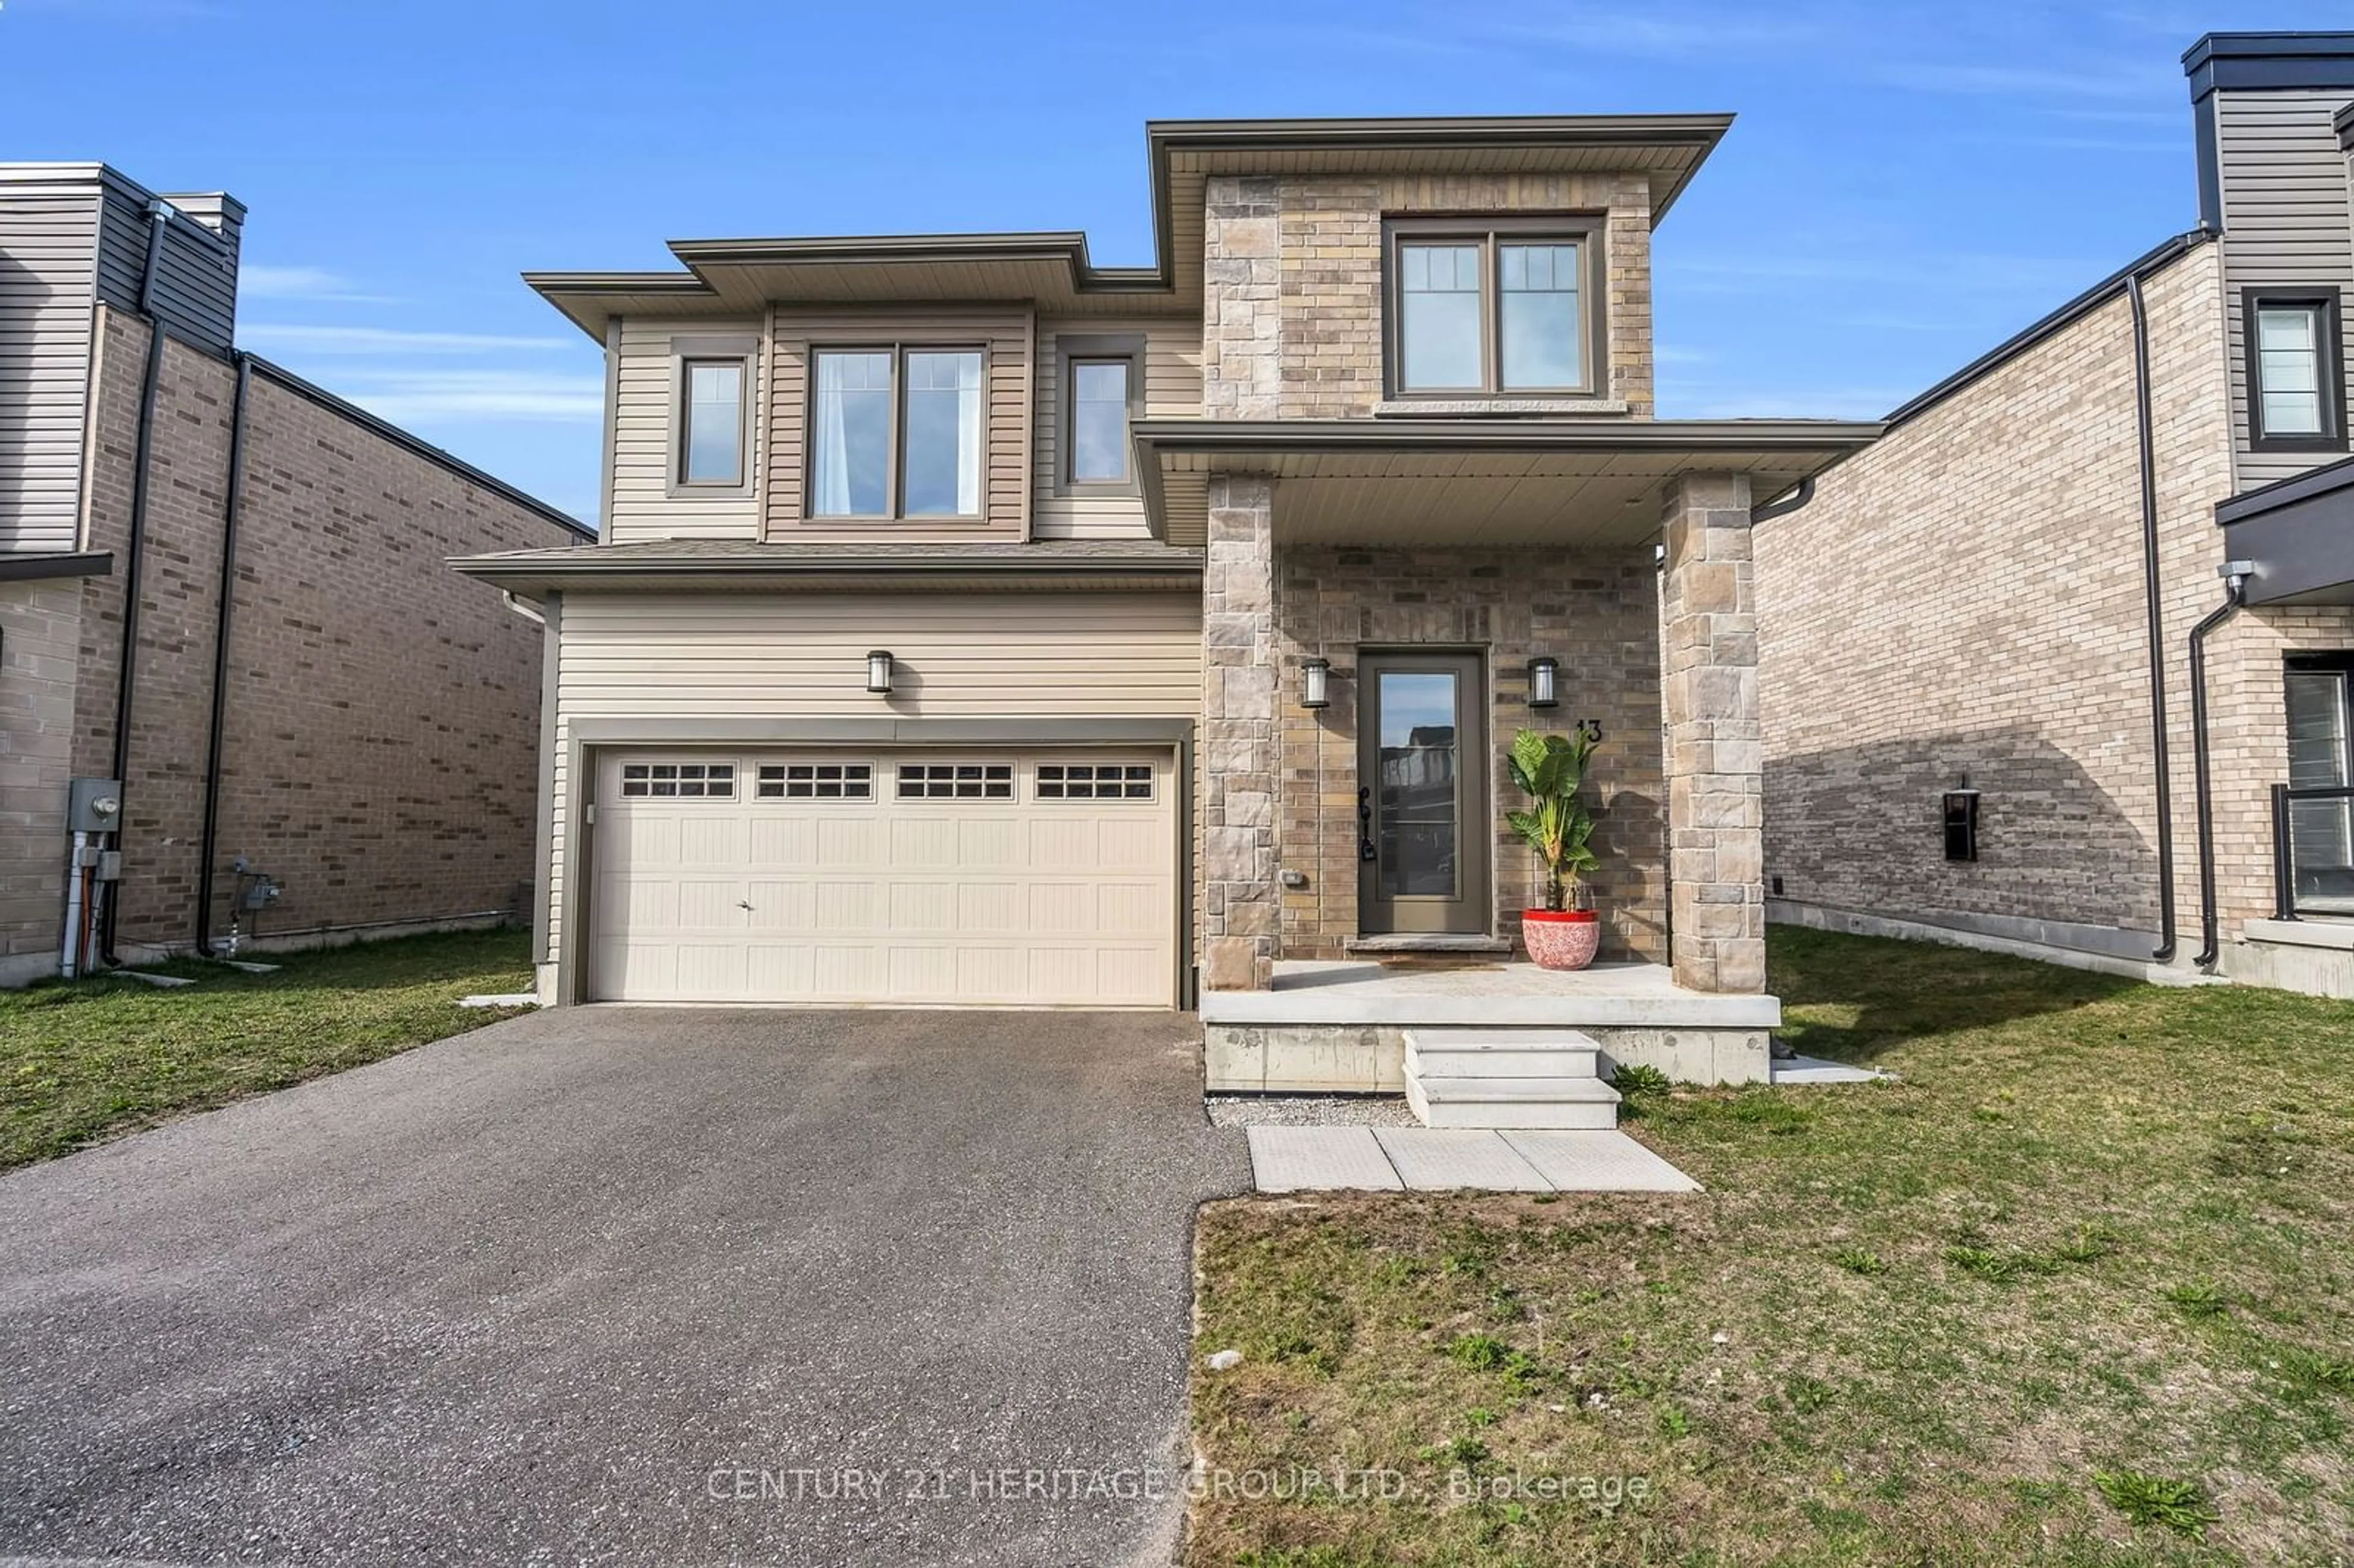 Home with brick exterior material for 13 Mabern St, Barrie Ontario L9J 0J1